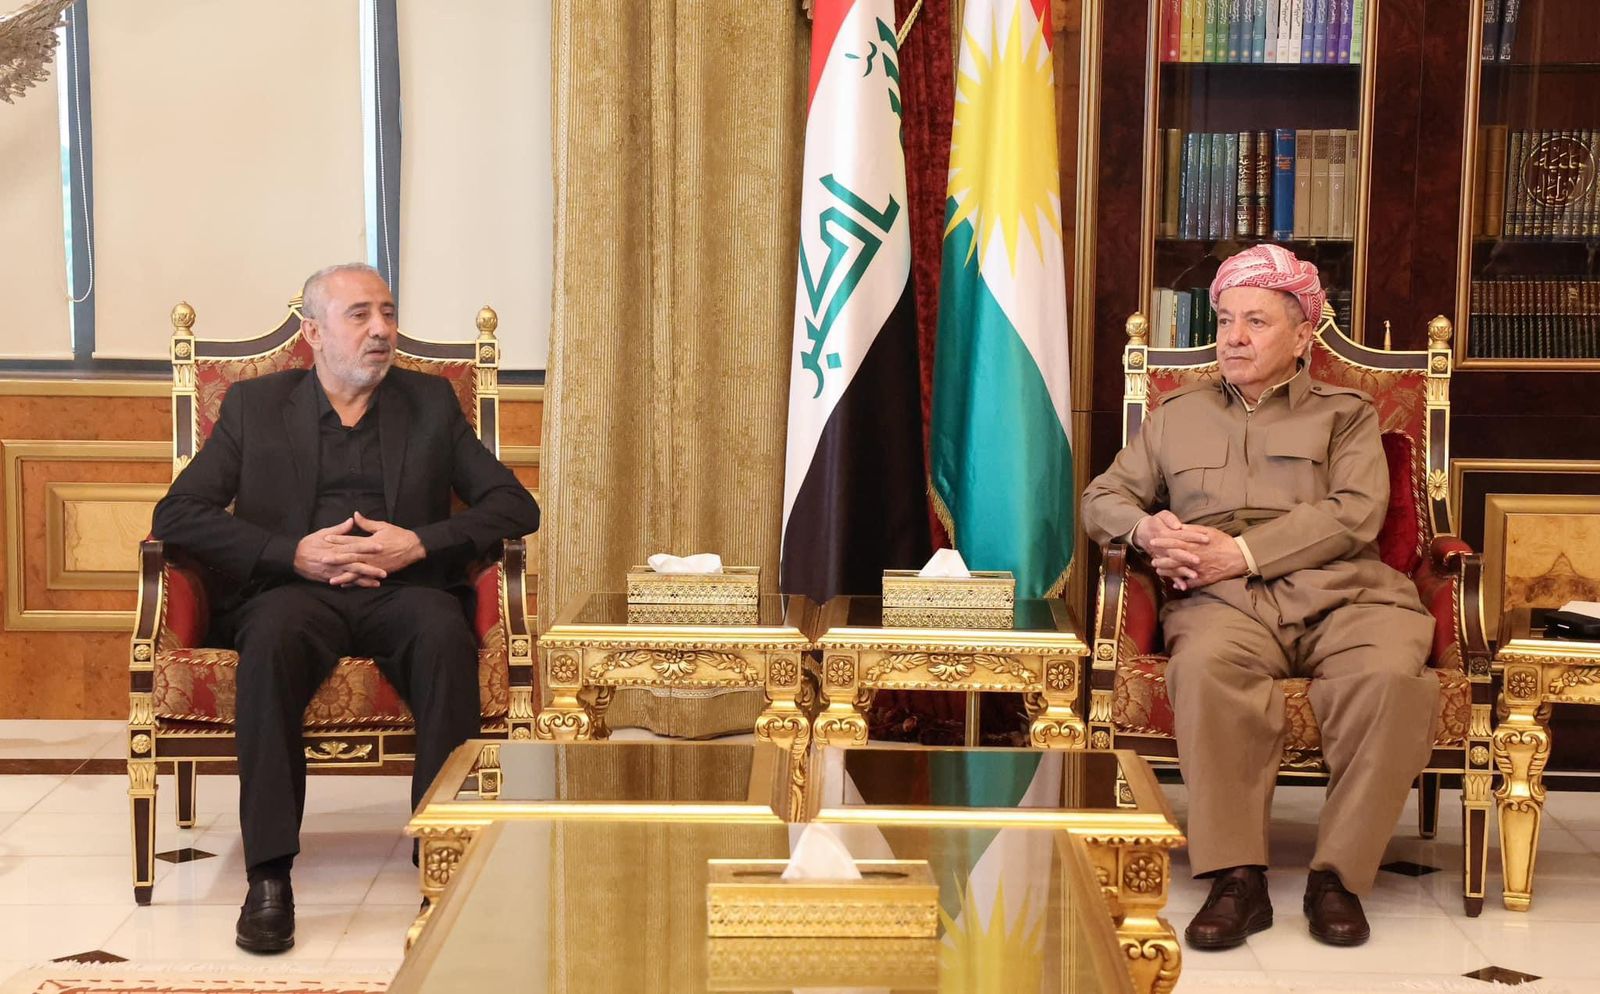 Leader Barzani urges fair compensation for victims of former Iraqi regime